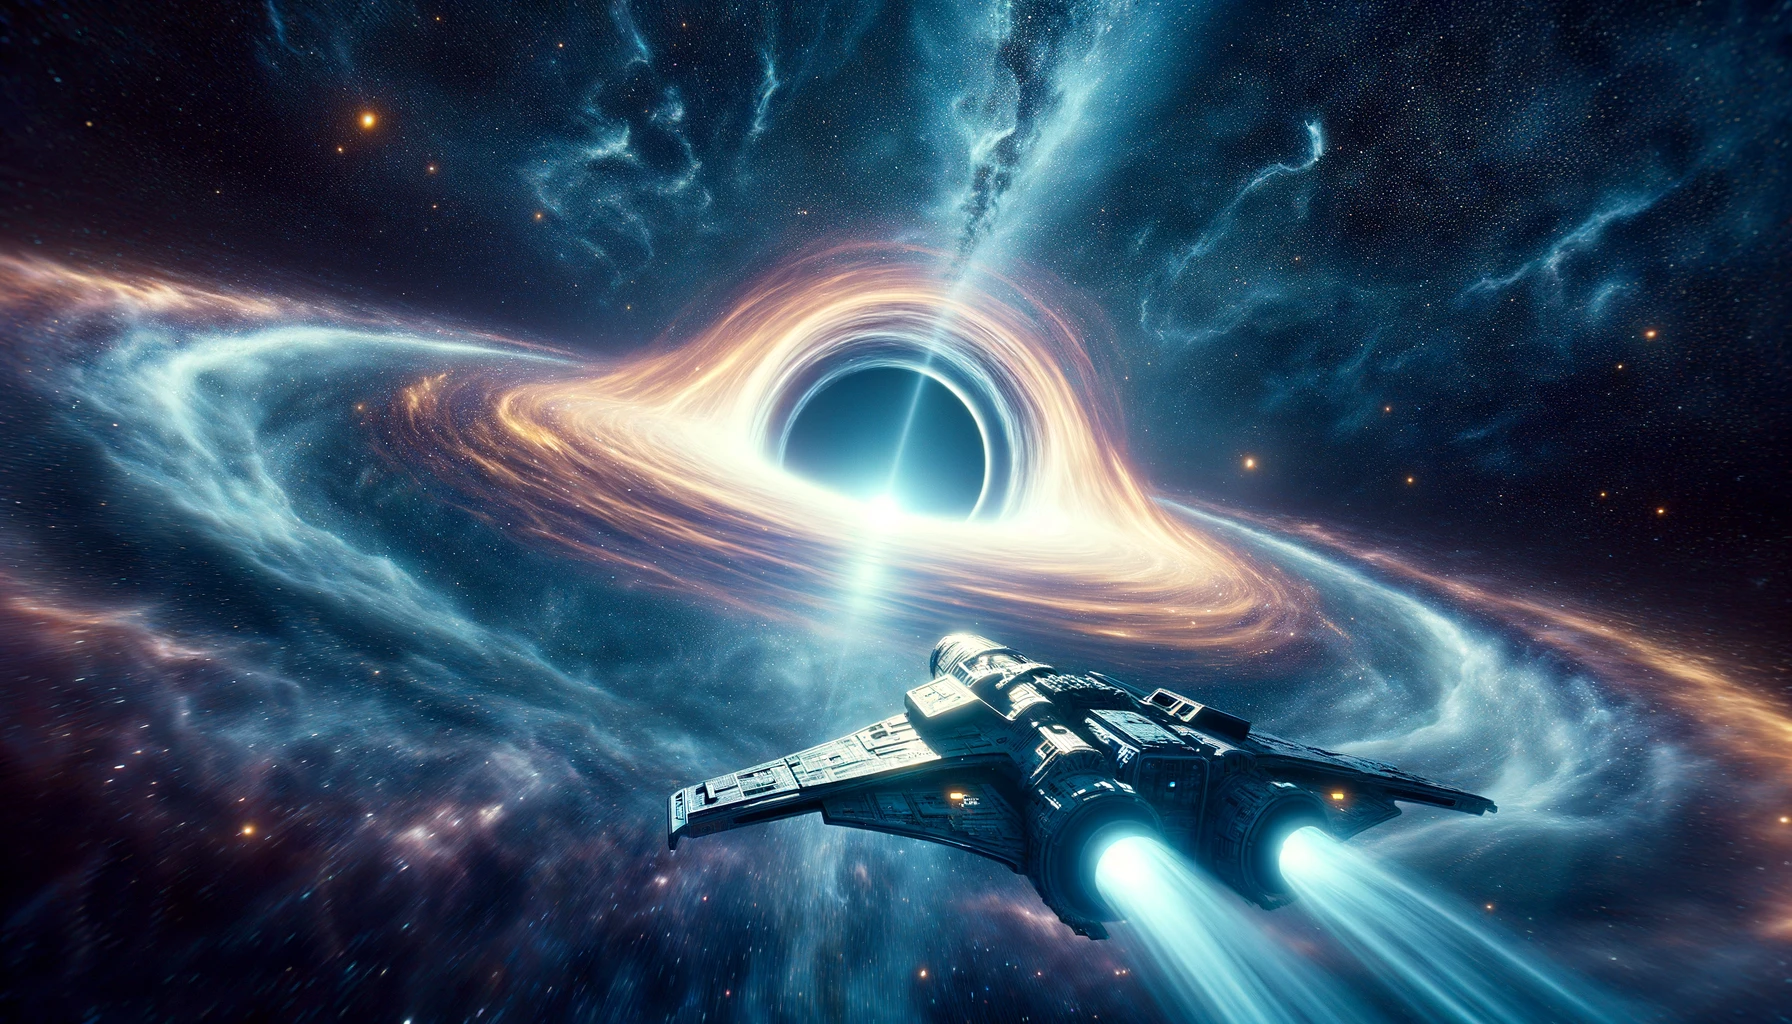 DALL·E 2024 03 03 01.38.56 A science fiction inspired image of a spaceship traveling through a wormhole in space similar to themes seen in Interstellar. The image shows a fut